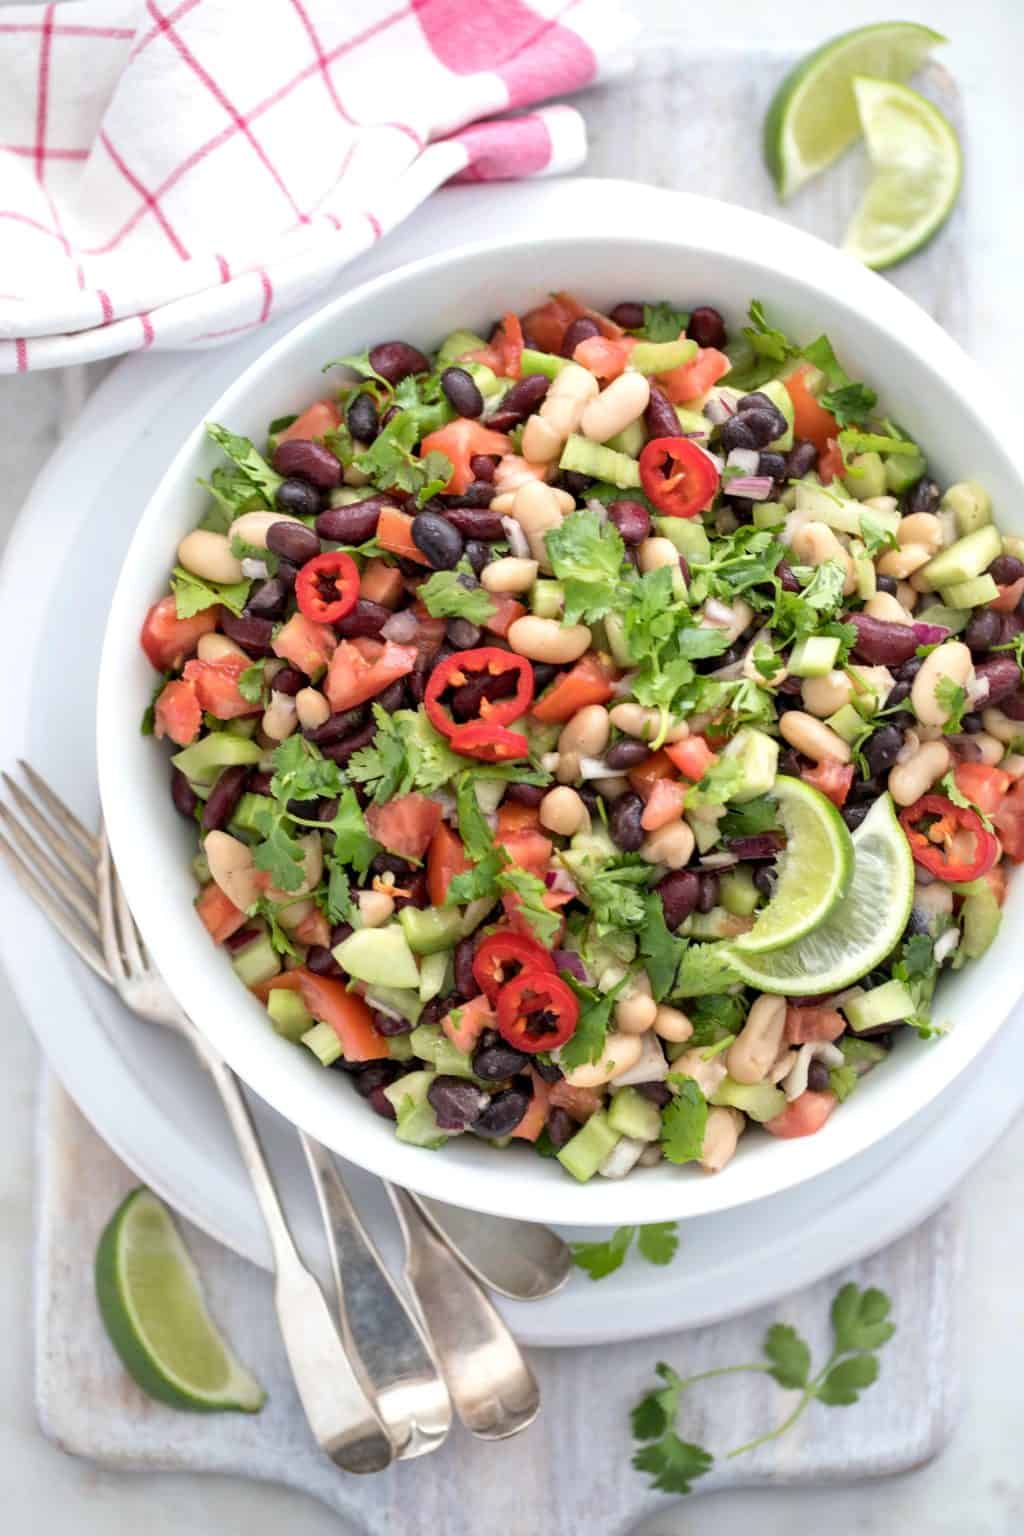 Mexican Bean Salad Recipe - The Harvest Kitchen